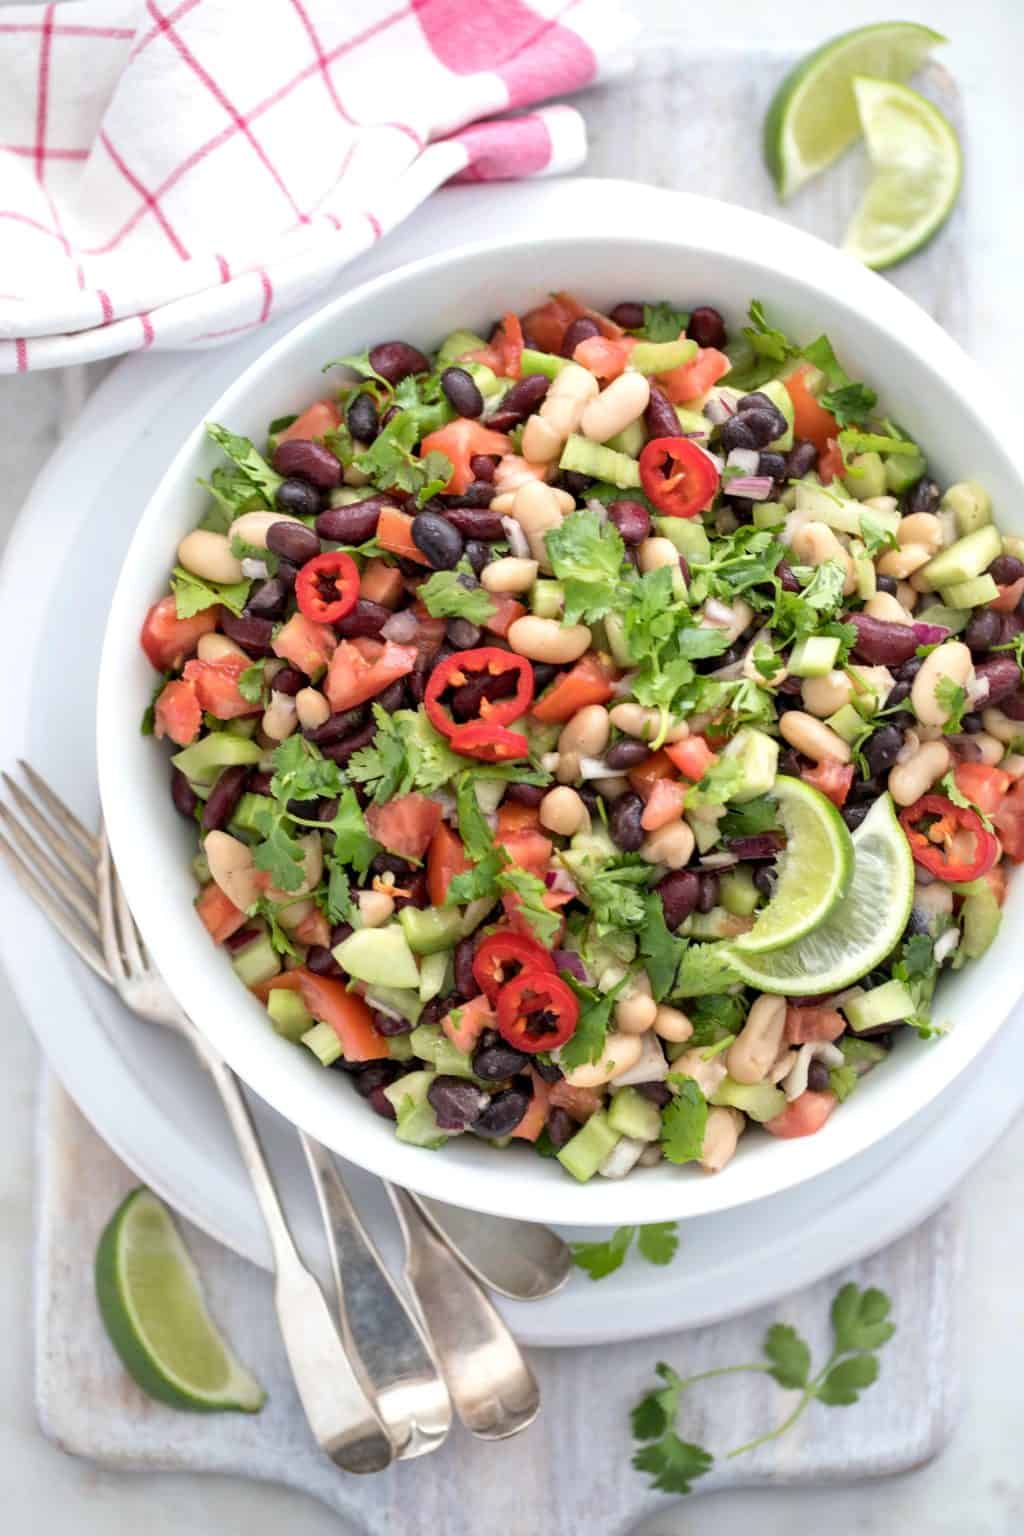 Mexican Bean Salad Recipe - The Harvest Kitchen